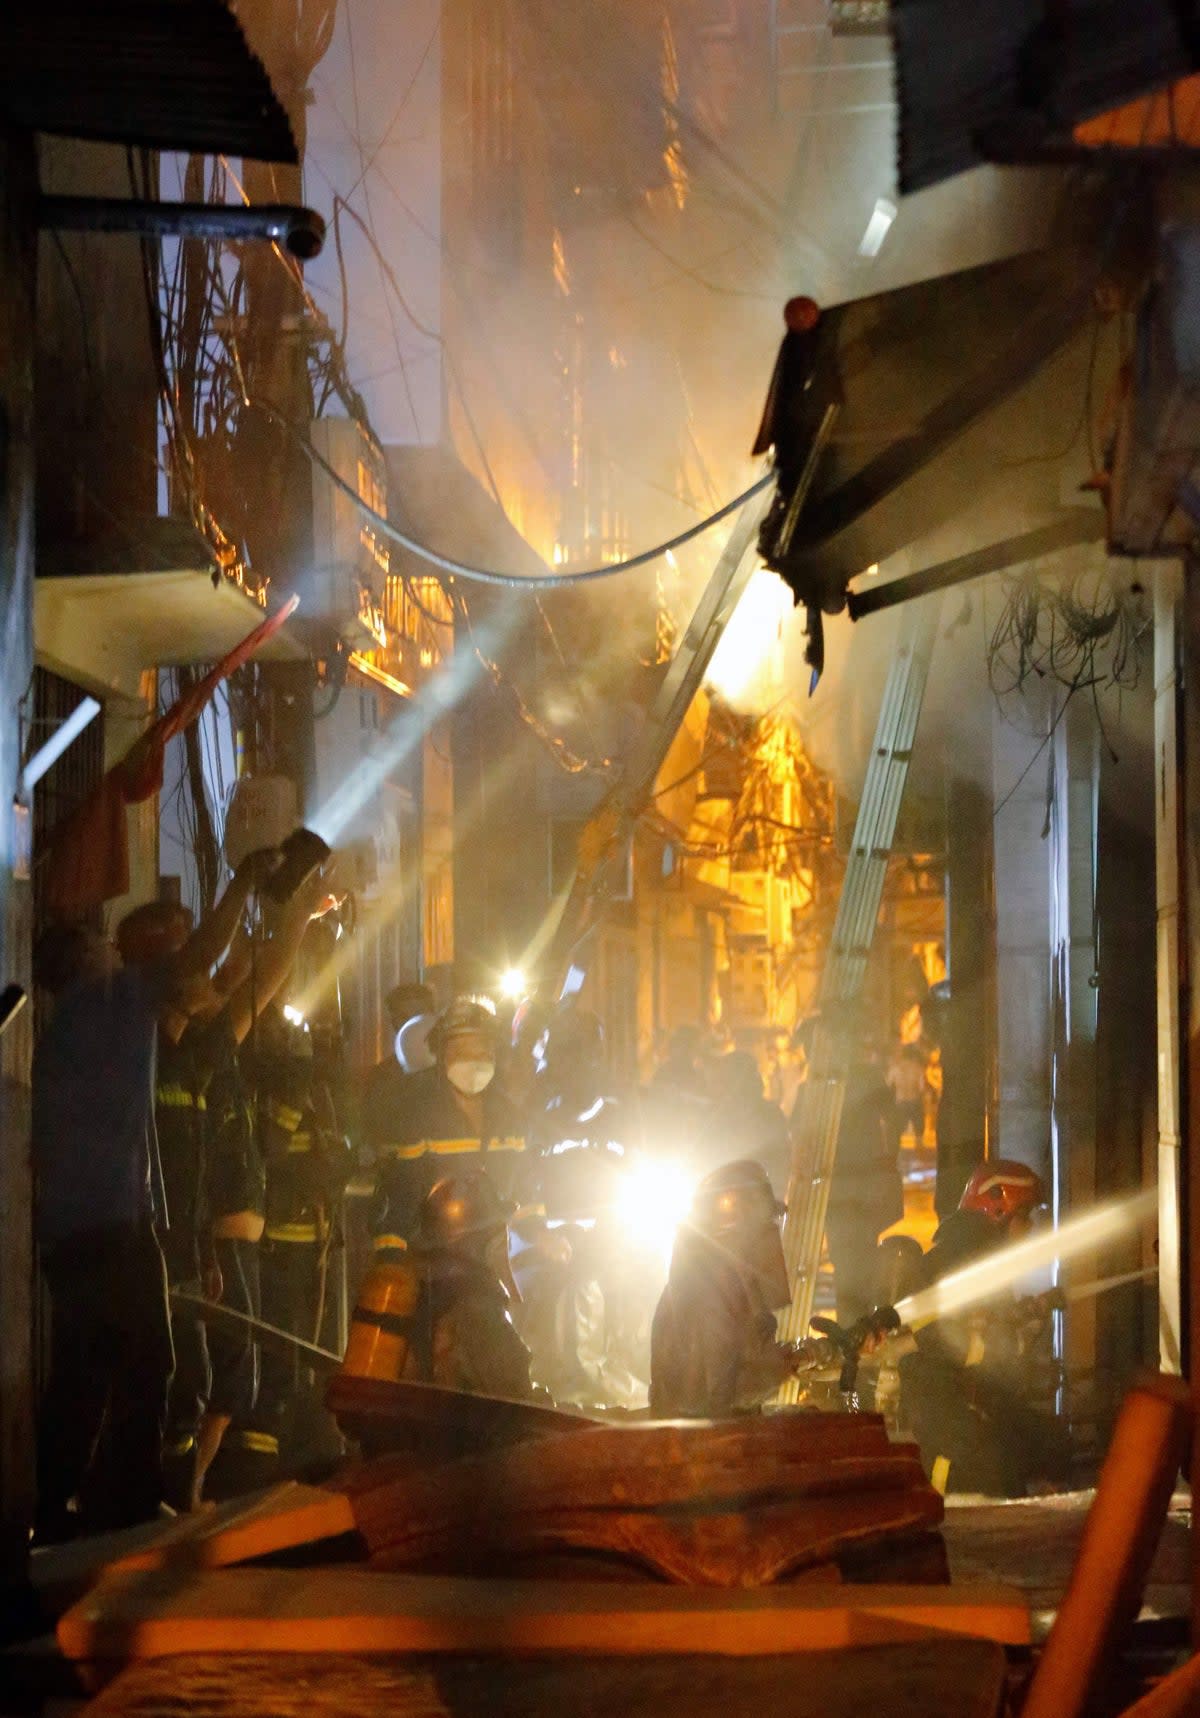 Firefighters work to put out a fire and rescue people at an apartment block in Hanoi (AFP via Getty Images)